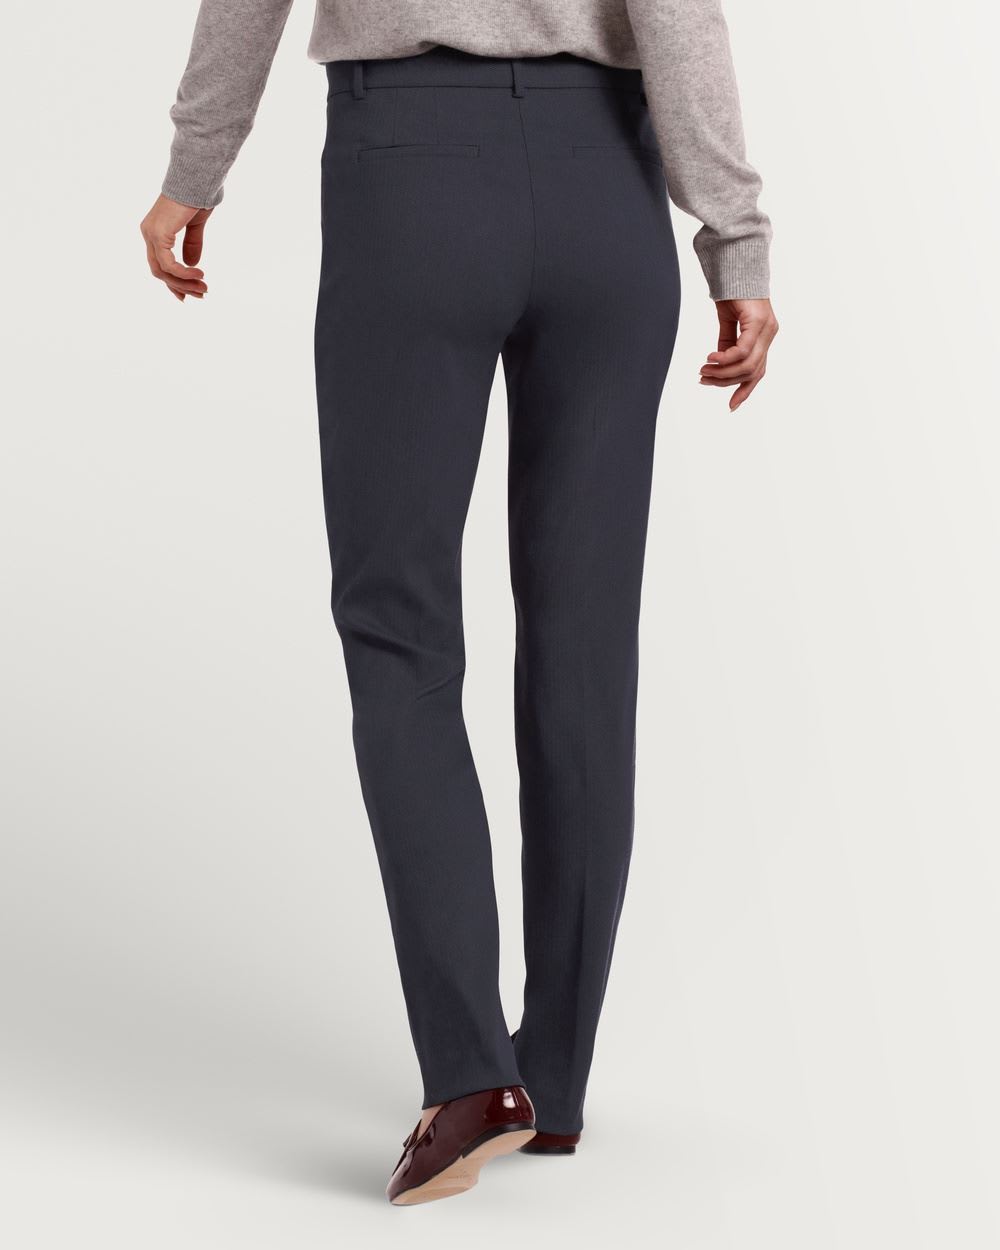 Patterned Straight Leg Pant The Iconic - Tall